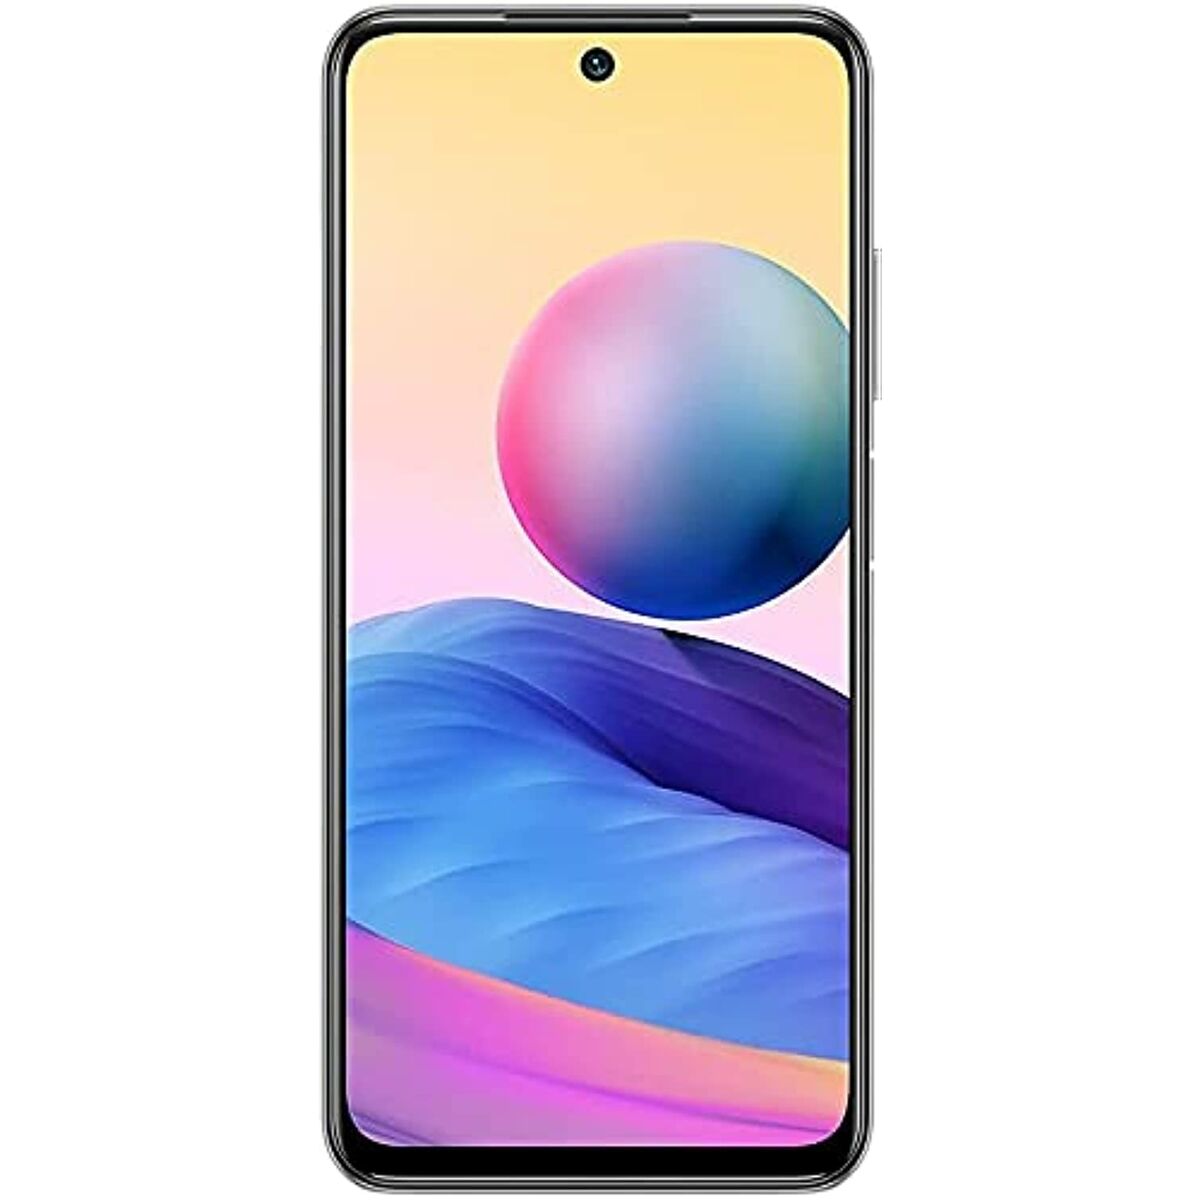 Smartphone Xiaomi Redmi Note 10 6,5" 4 GB RAM 64 GB Blue, Xiaomi, Electronics, Mobile phones, smartphone-xiaomi-redmi-note-10-6-5-4-gb-ram-64-gb-blue, Brand_Xiaomi, category-reference-2609, category-reference-2617, category-reference-2618, category-reference-t-19653, category-reference-t-19894, category-reference-t-21319, Condition_NEW, office, Price_100 - 200, telephones & tablets, Teleworking, wifi y bluetooth, RiotNook